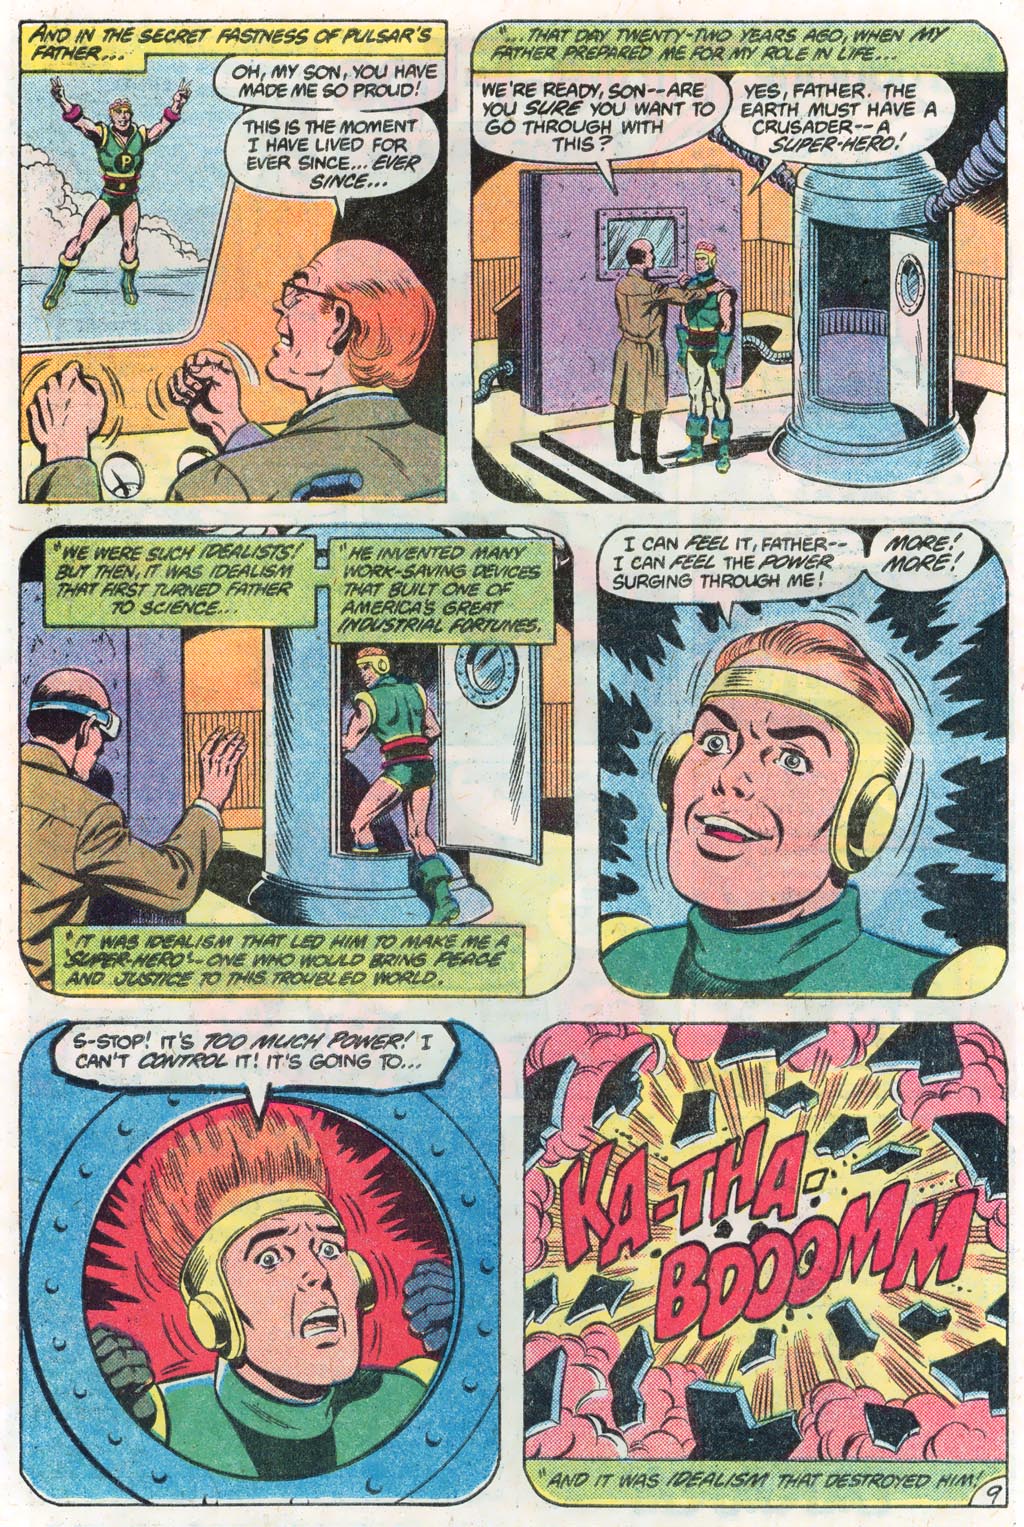 The New Adventures of Superboy 31 Page 13